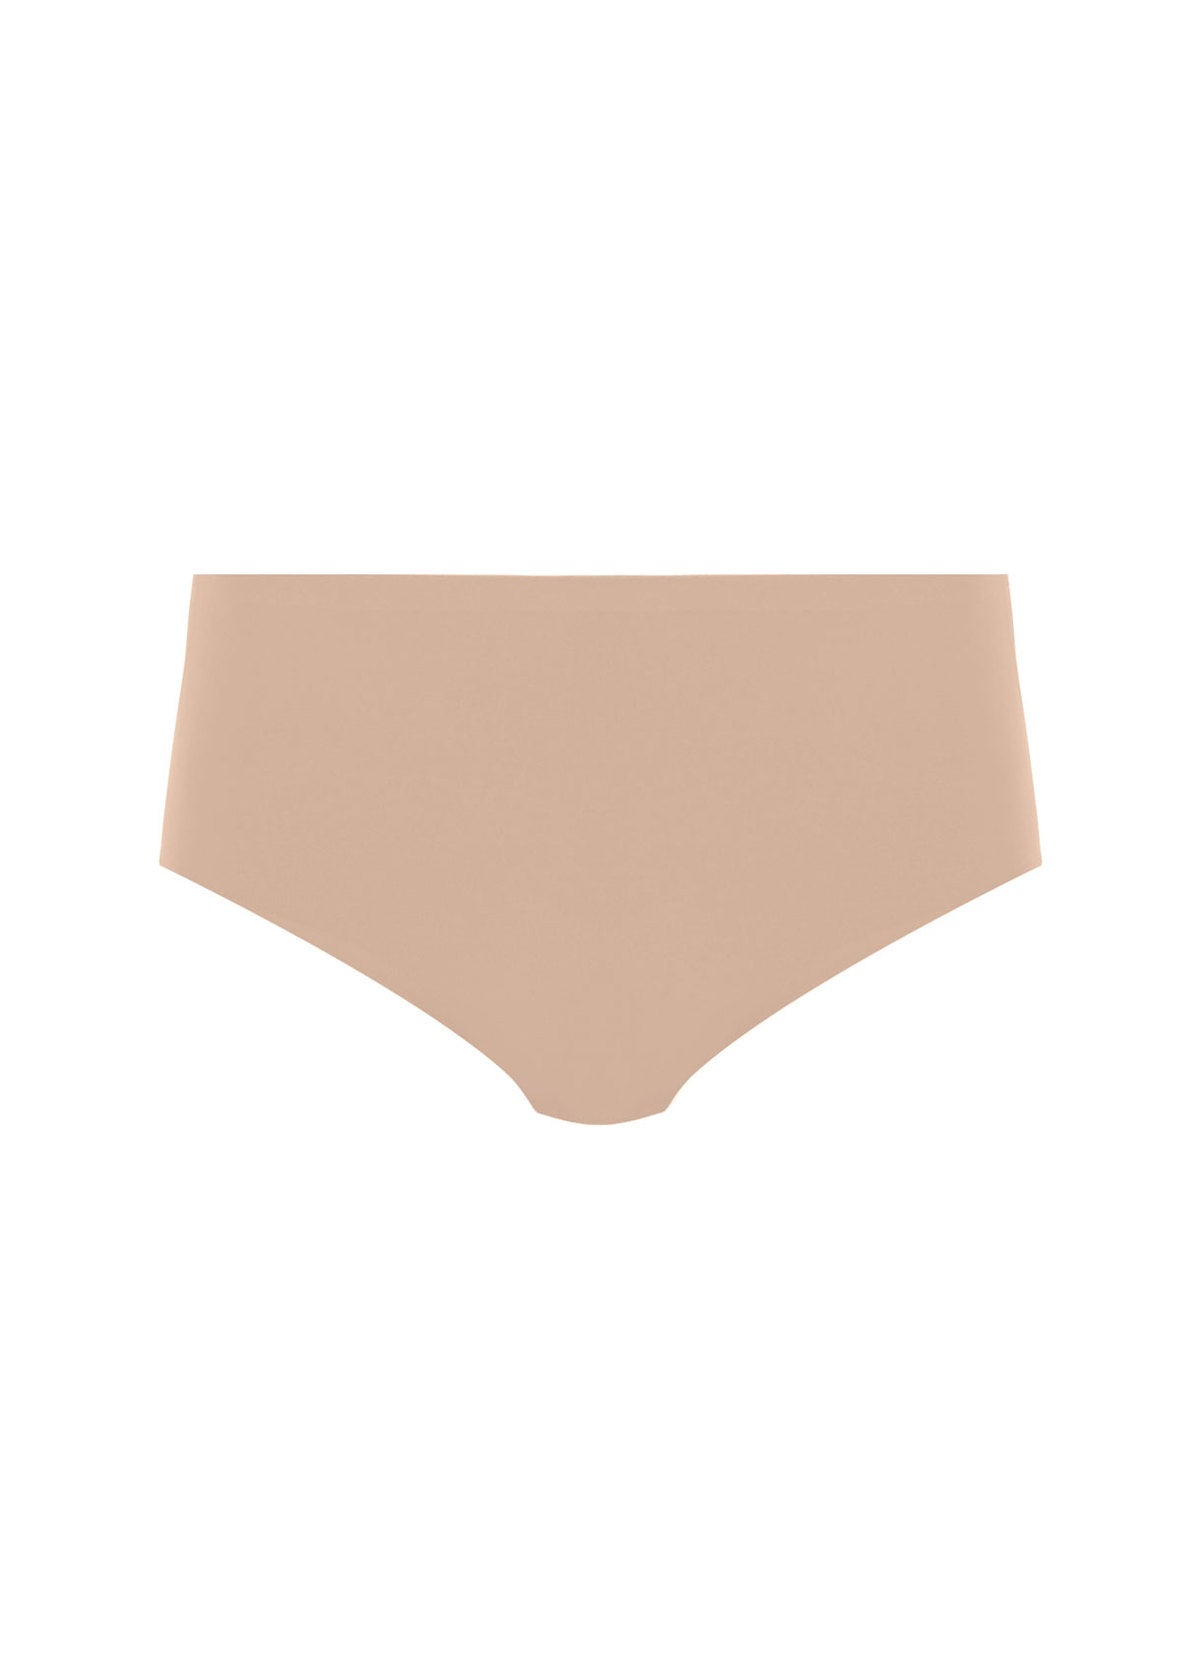 Smoothease Invisible Stretch Brief - Natural Beige